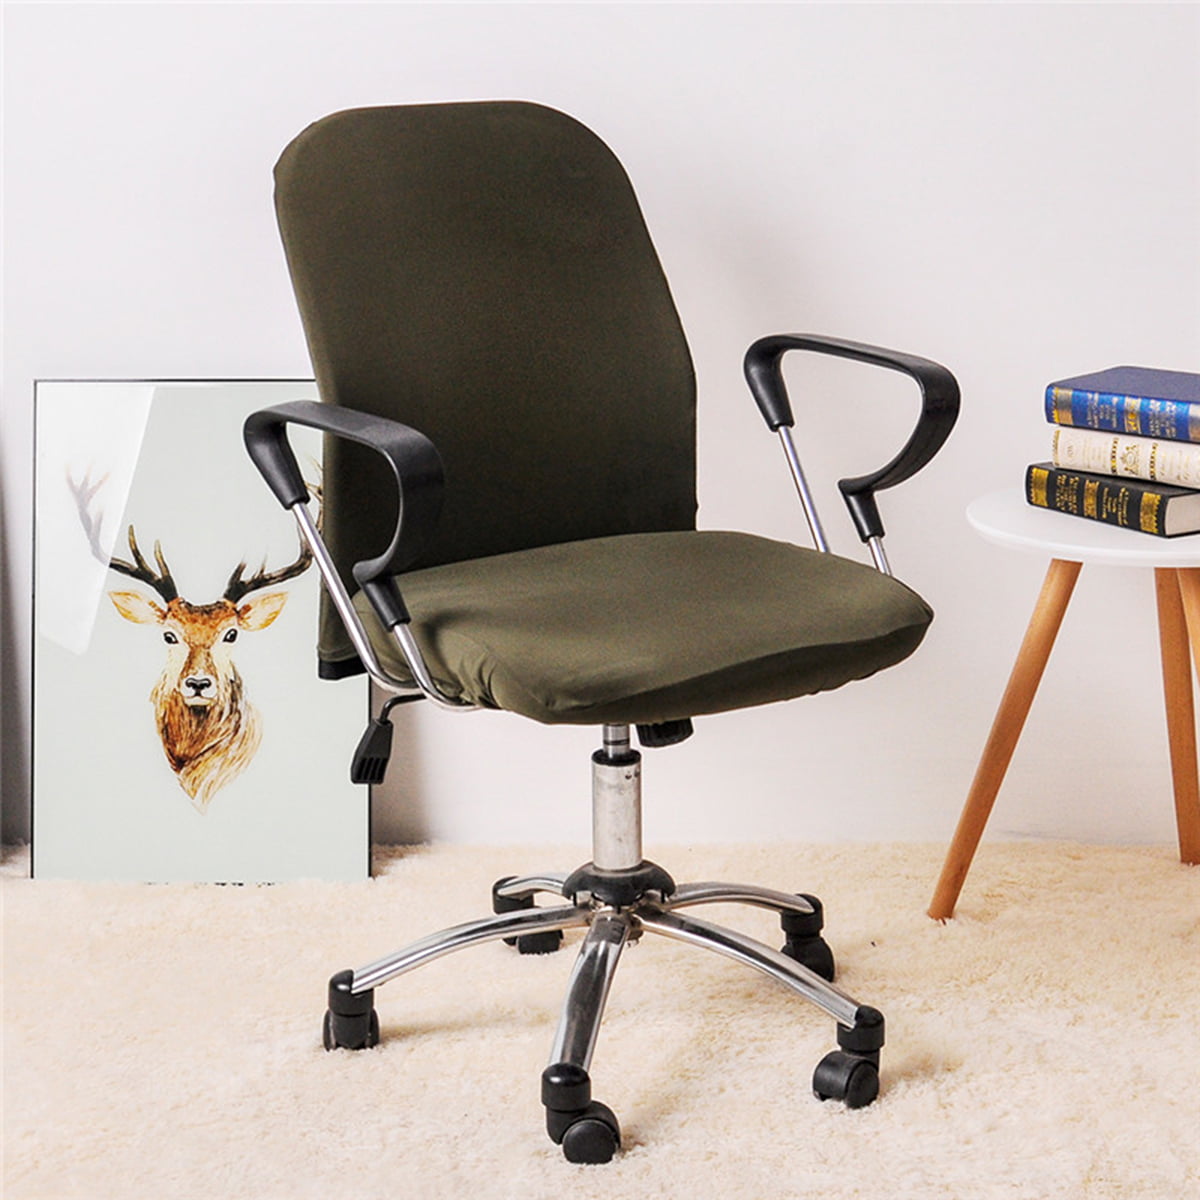 Details about   2pcs Office Computer Rotating Chair Slipcover Protective Stretch Seat Cover